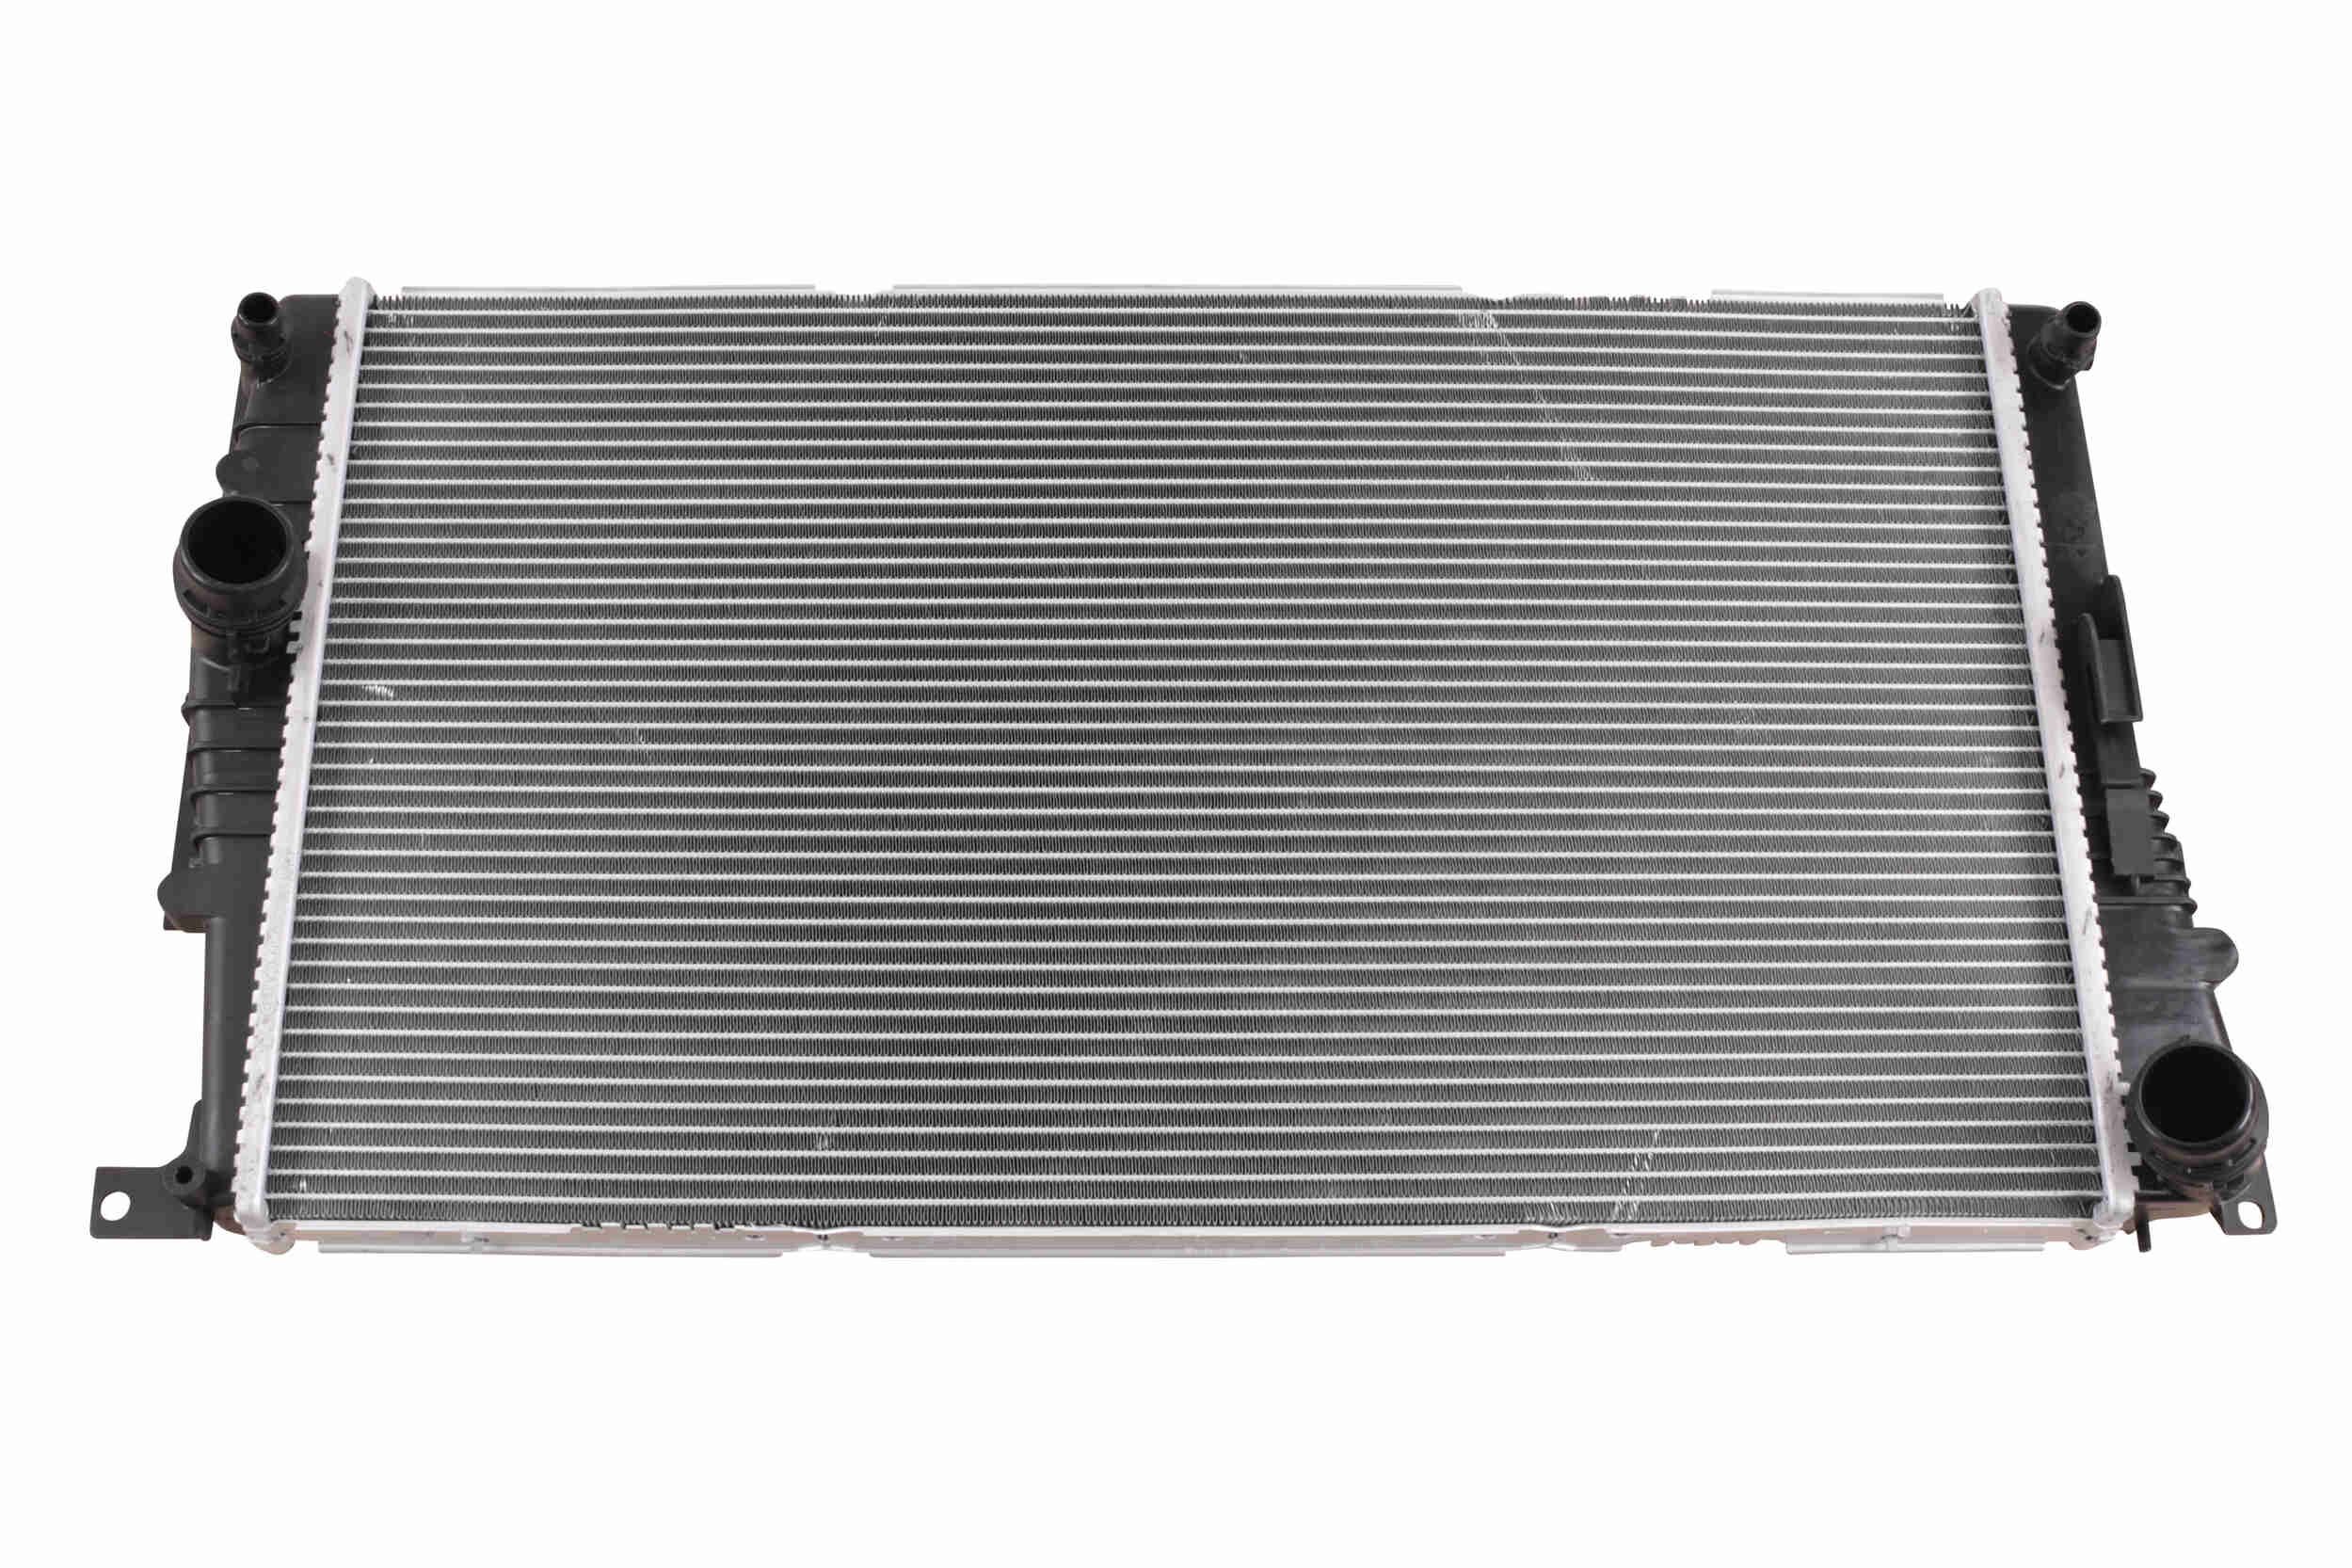 VEMO Aluminium, for vehicles with/without air conditioning, 600 x 364 x 32 mm, Automatic Transmission Radiator V20-60-0067 buy